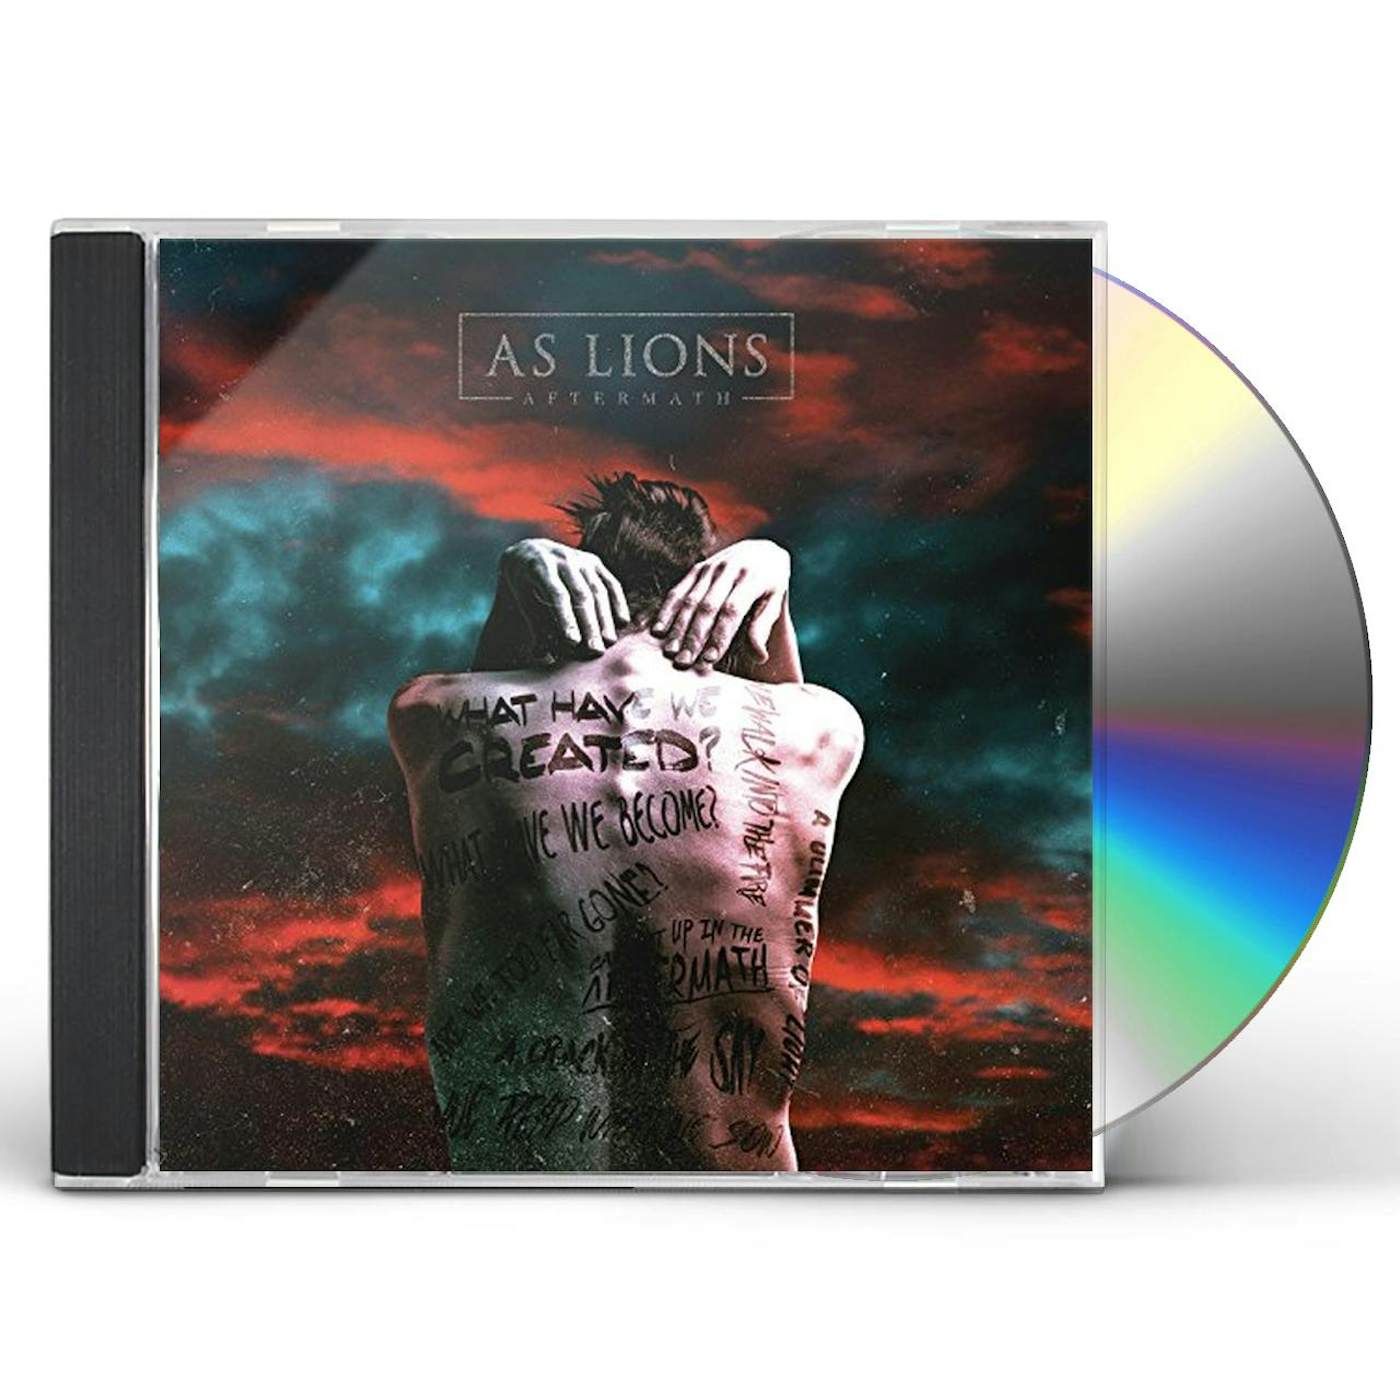 As Lions AFTERMATH CD